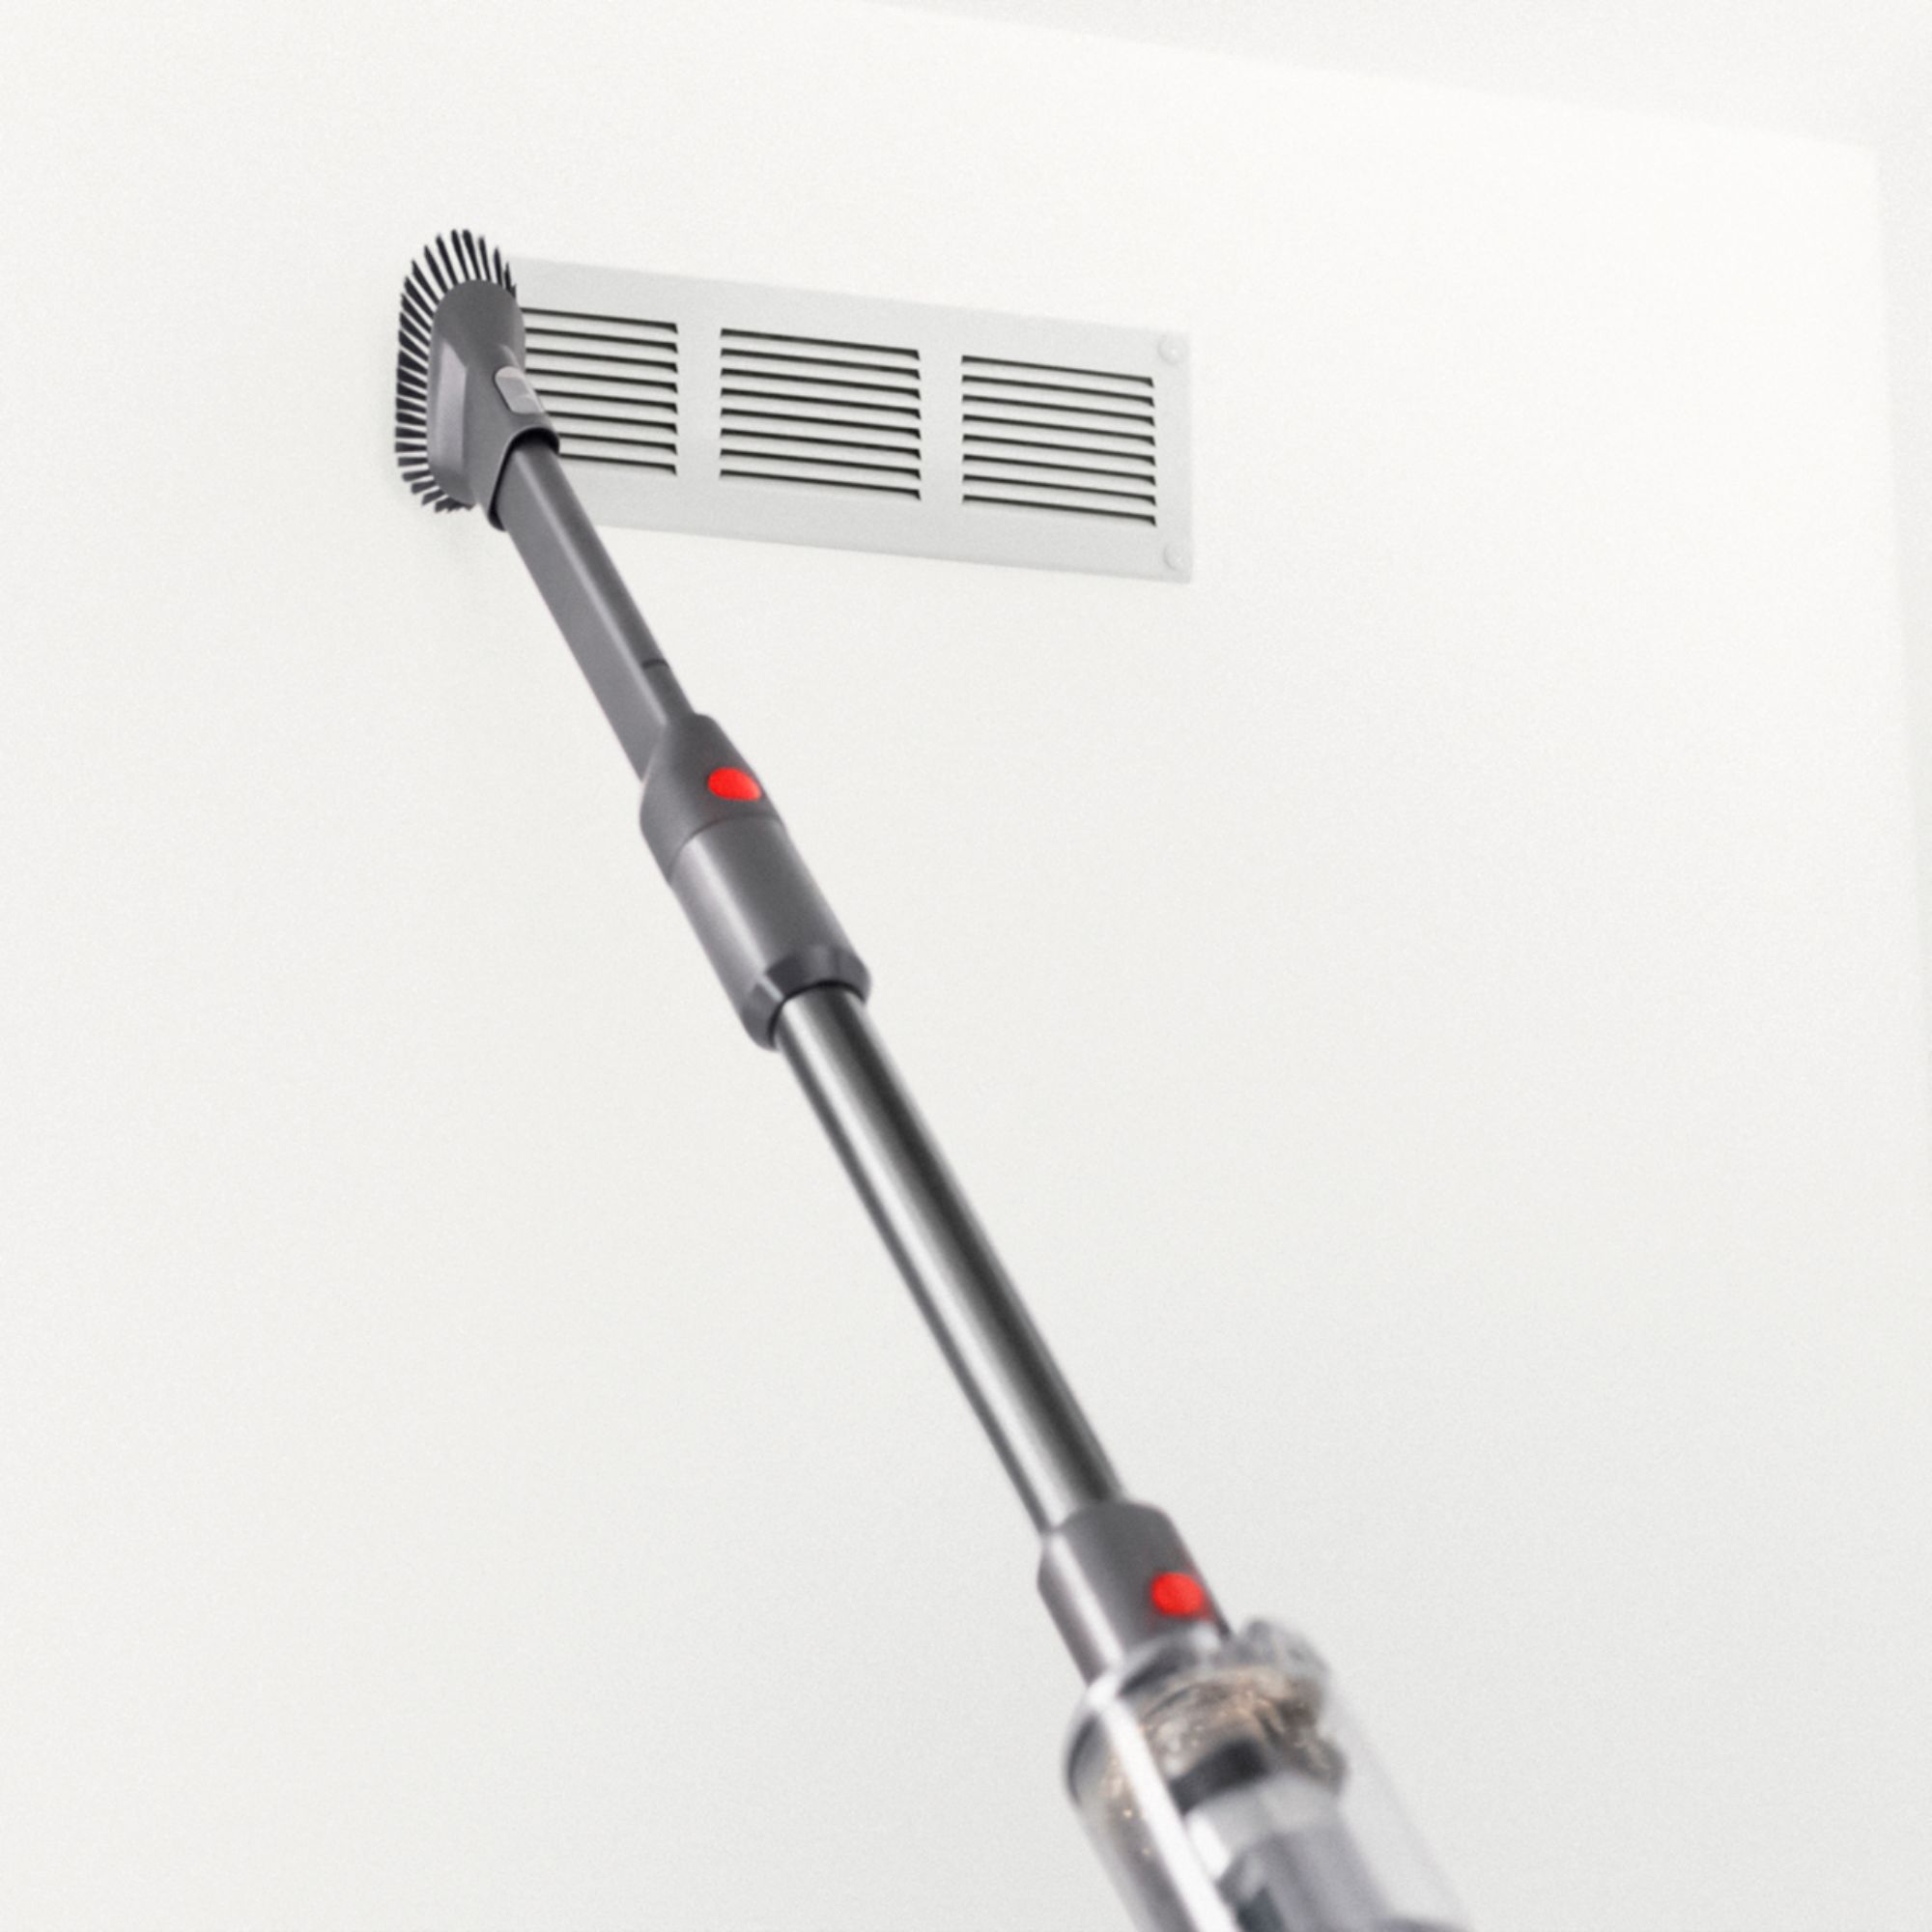 Dyson vacuum cleaning the surface of a vent